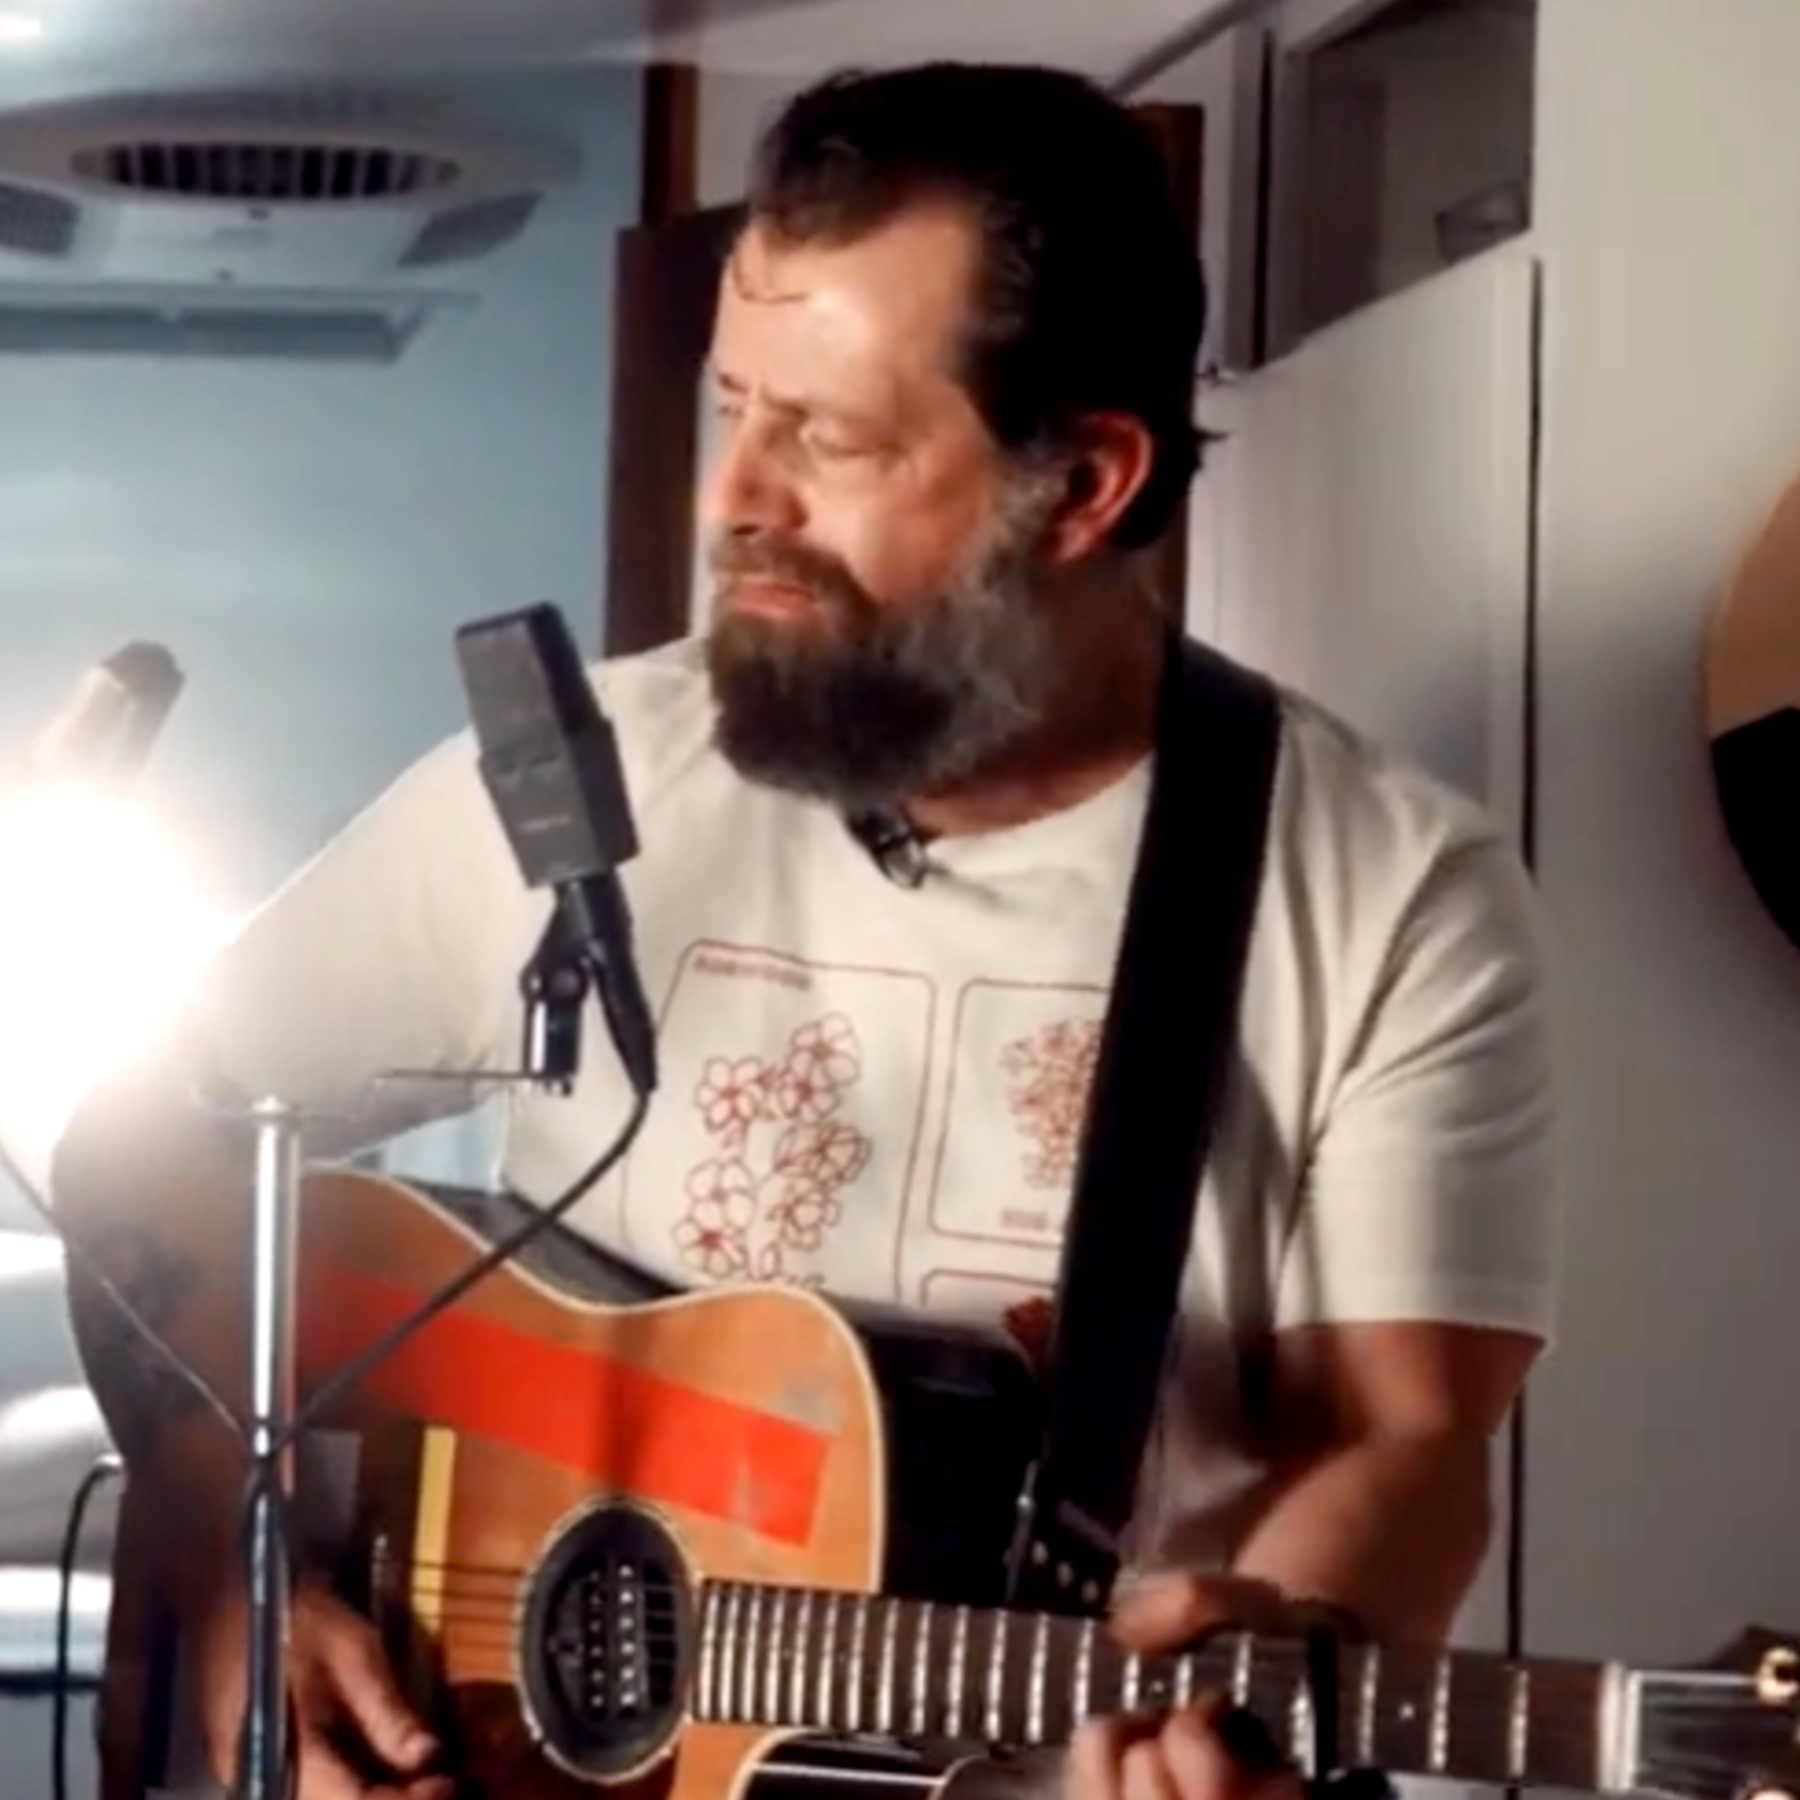 WATCH: Jim Hurst, 'Long and Lonesome Old Freight Train'